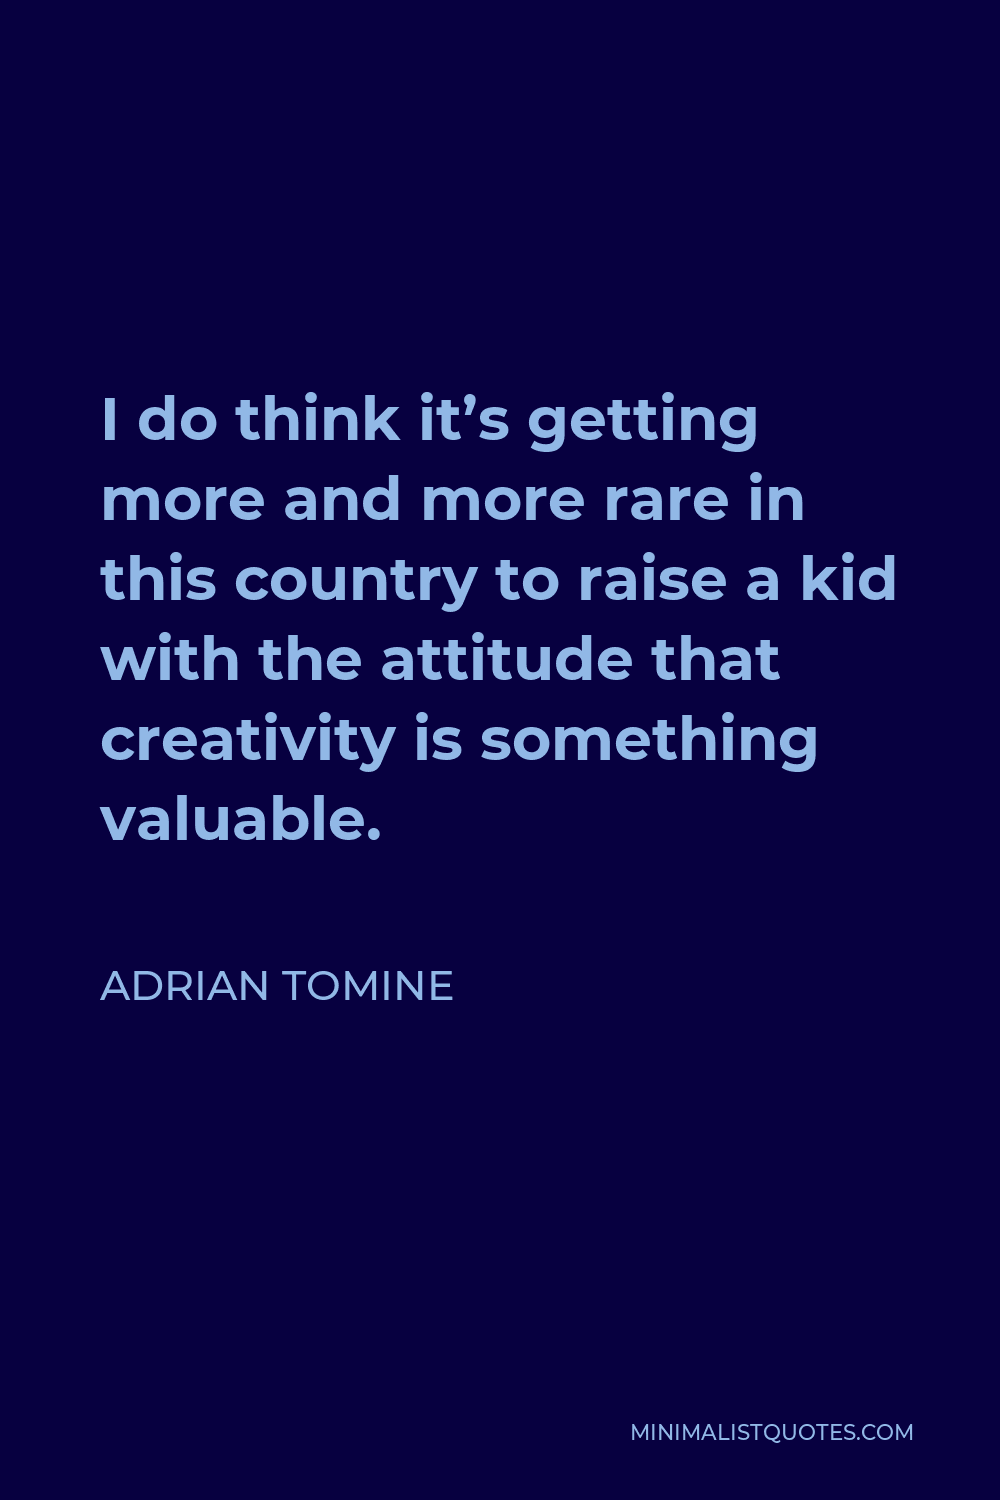 Adrian Tomine Quote - I do think it’s getting more and more rare in this country to raise a kid with the attitude that creativity is something valuable.